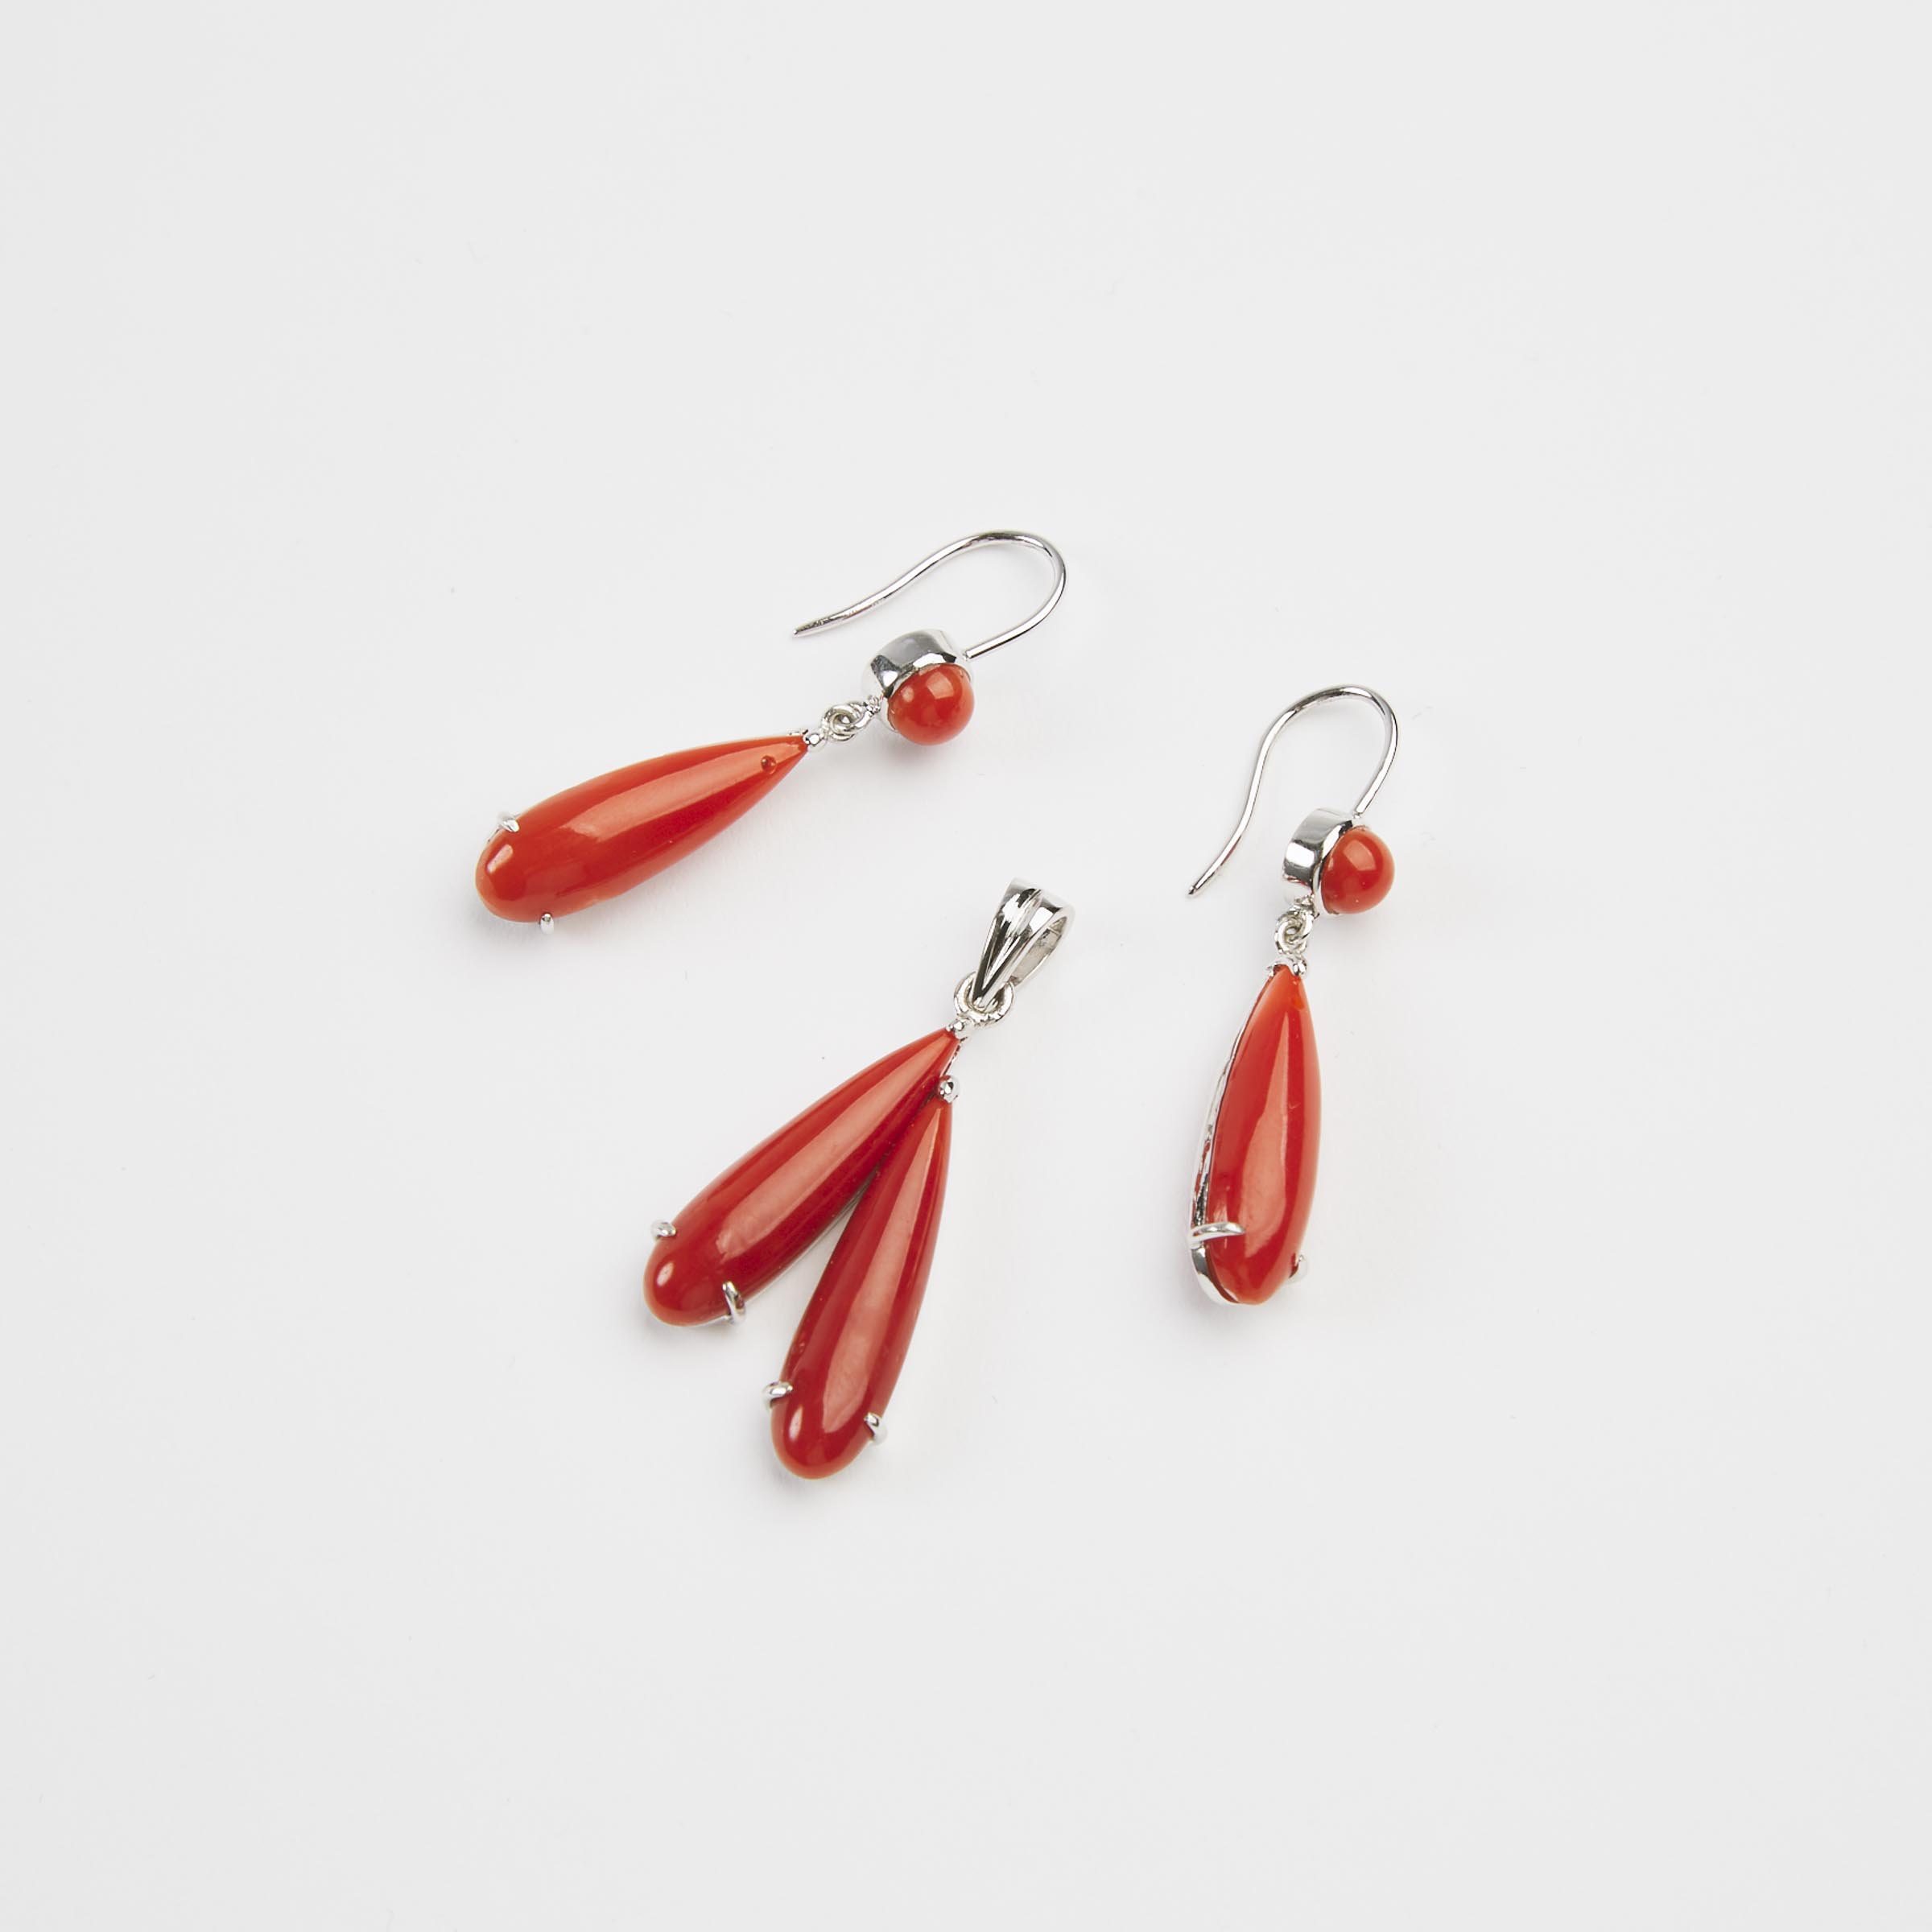 A Pair of Coral Drop Earrings and 3aa76b